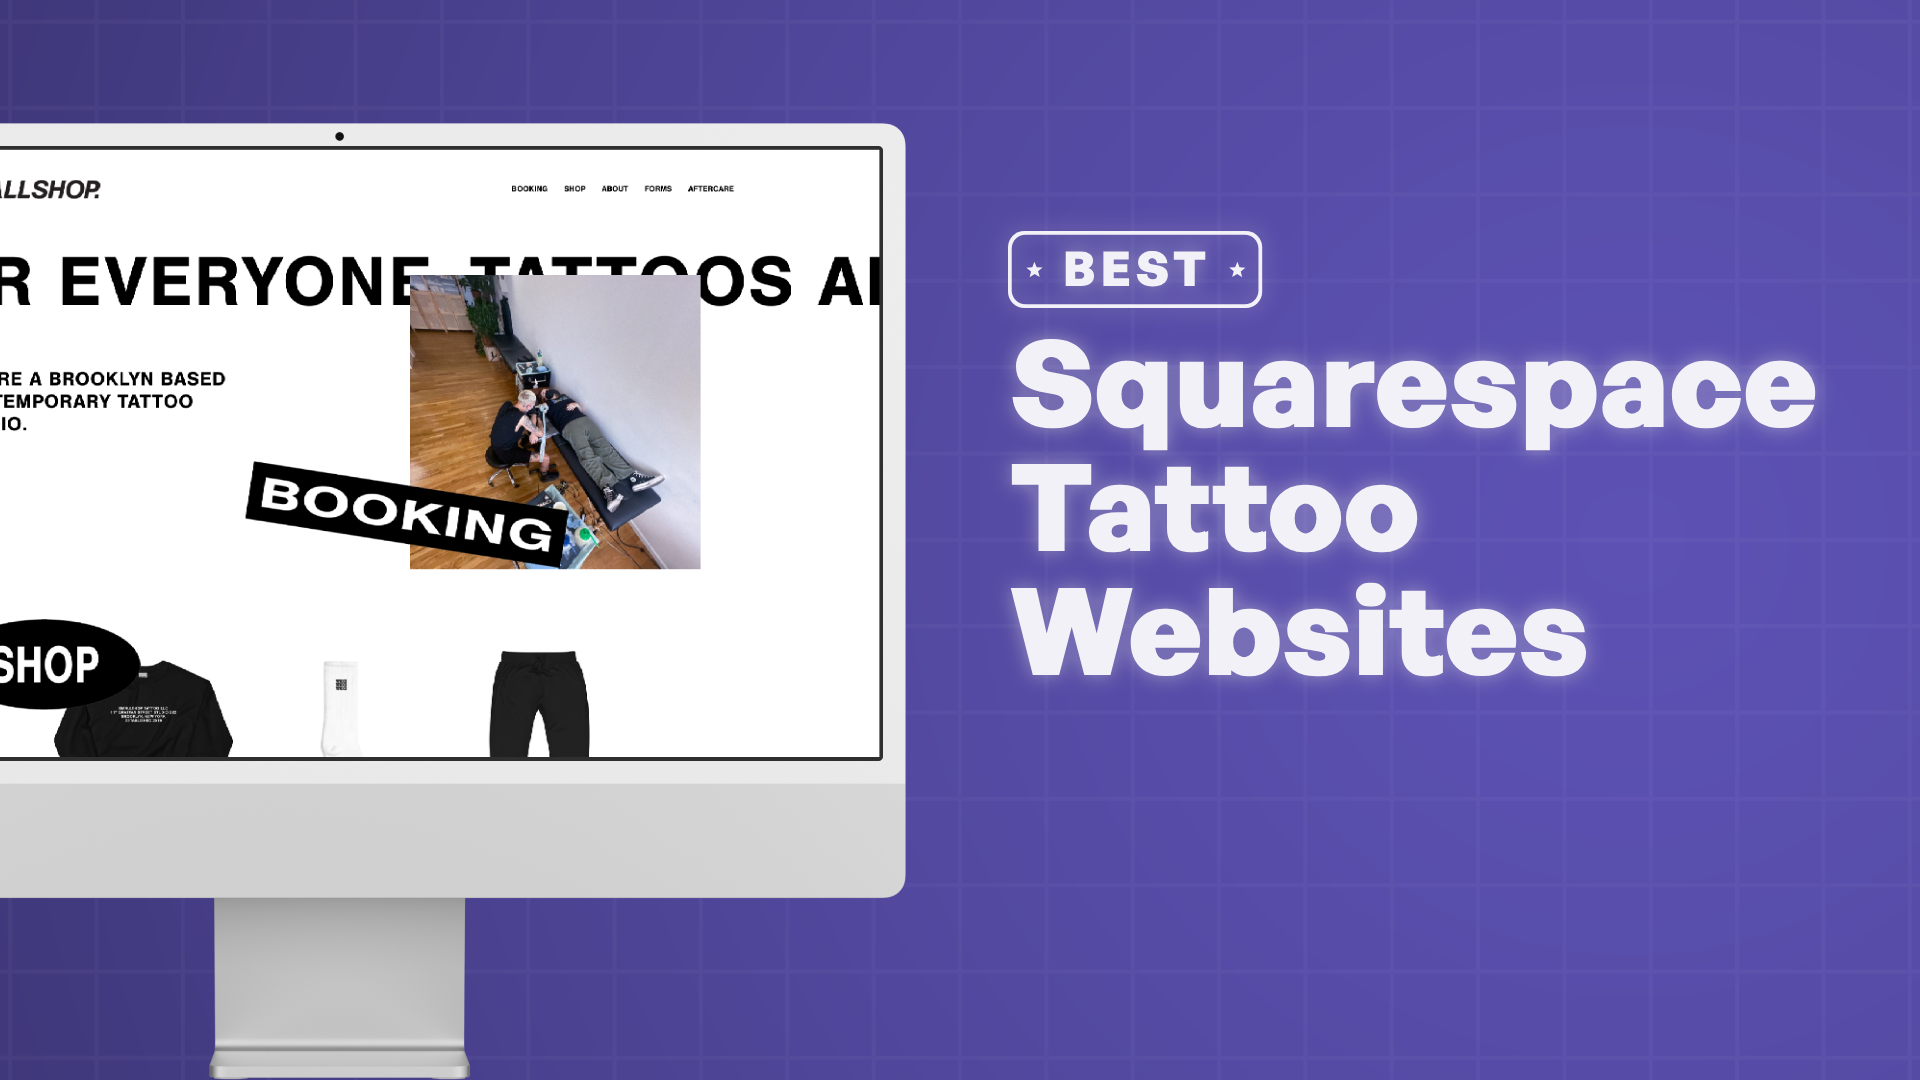 "Best Tattoo Websites on Squarespace" with screenshots of the tattoo websites on Squarespace